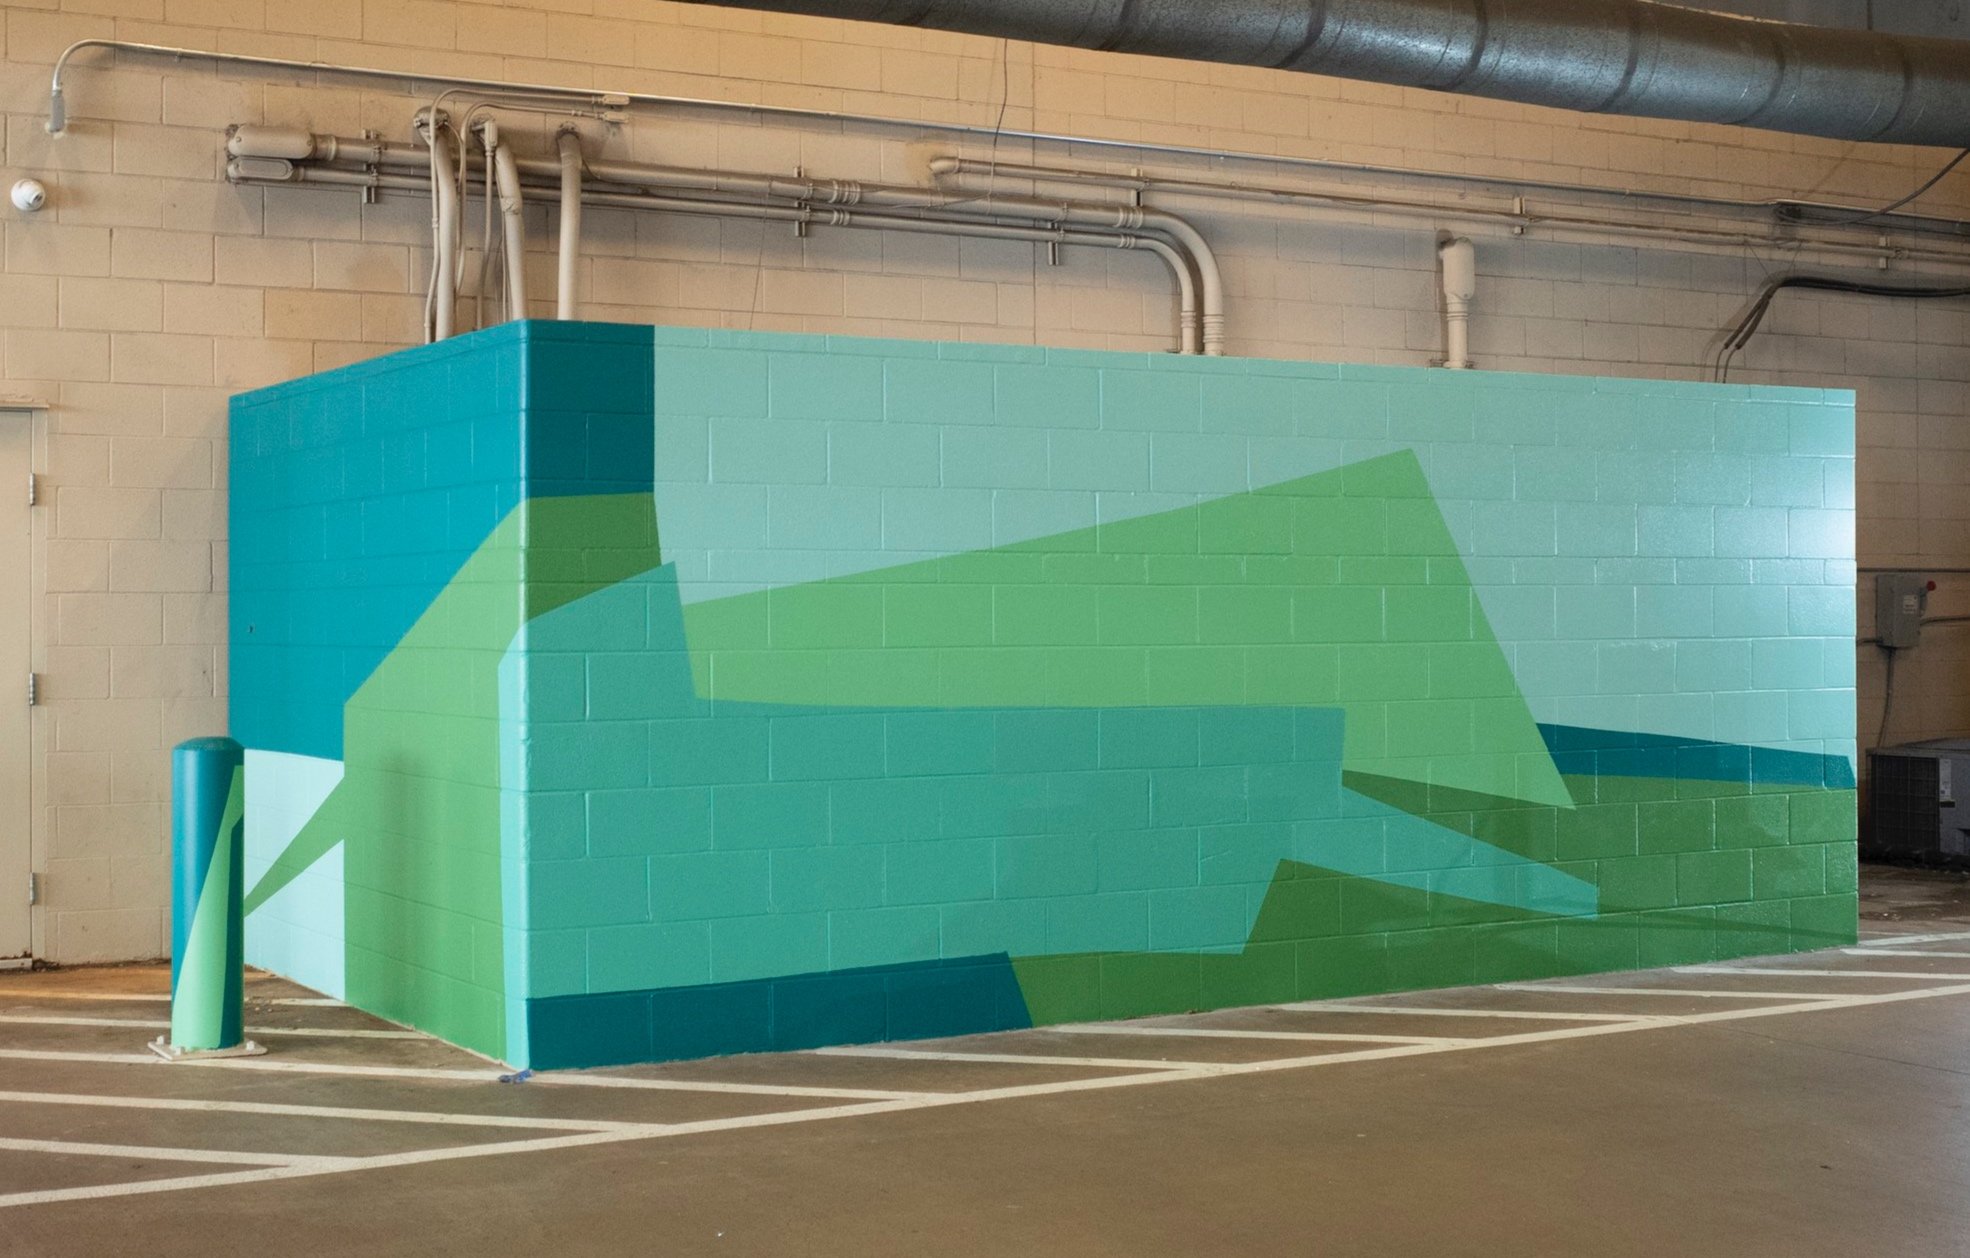  The Green Mural  96 x 276 in   Exterior Latex Paint on cinder block wall  Photo credit: Light 42 studio 